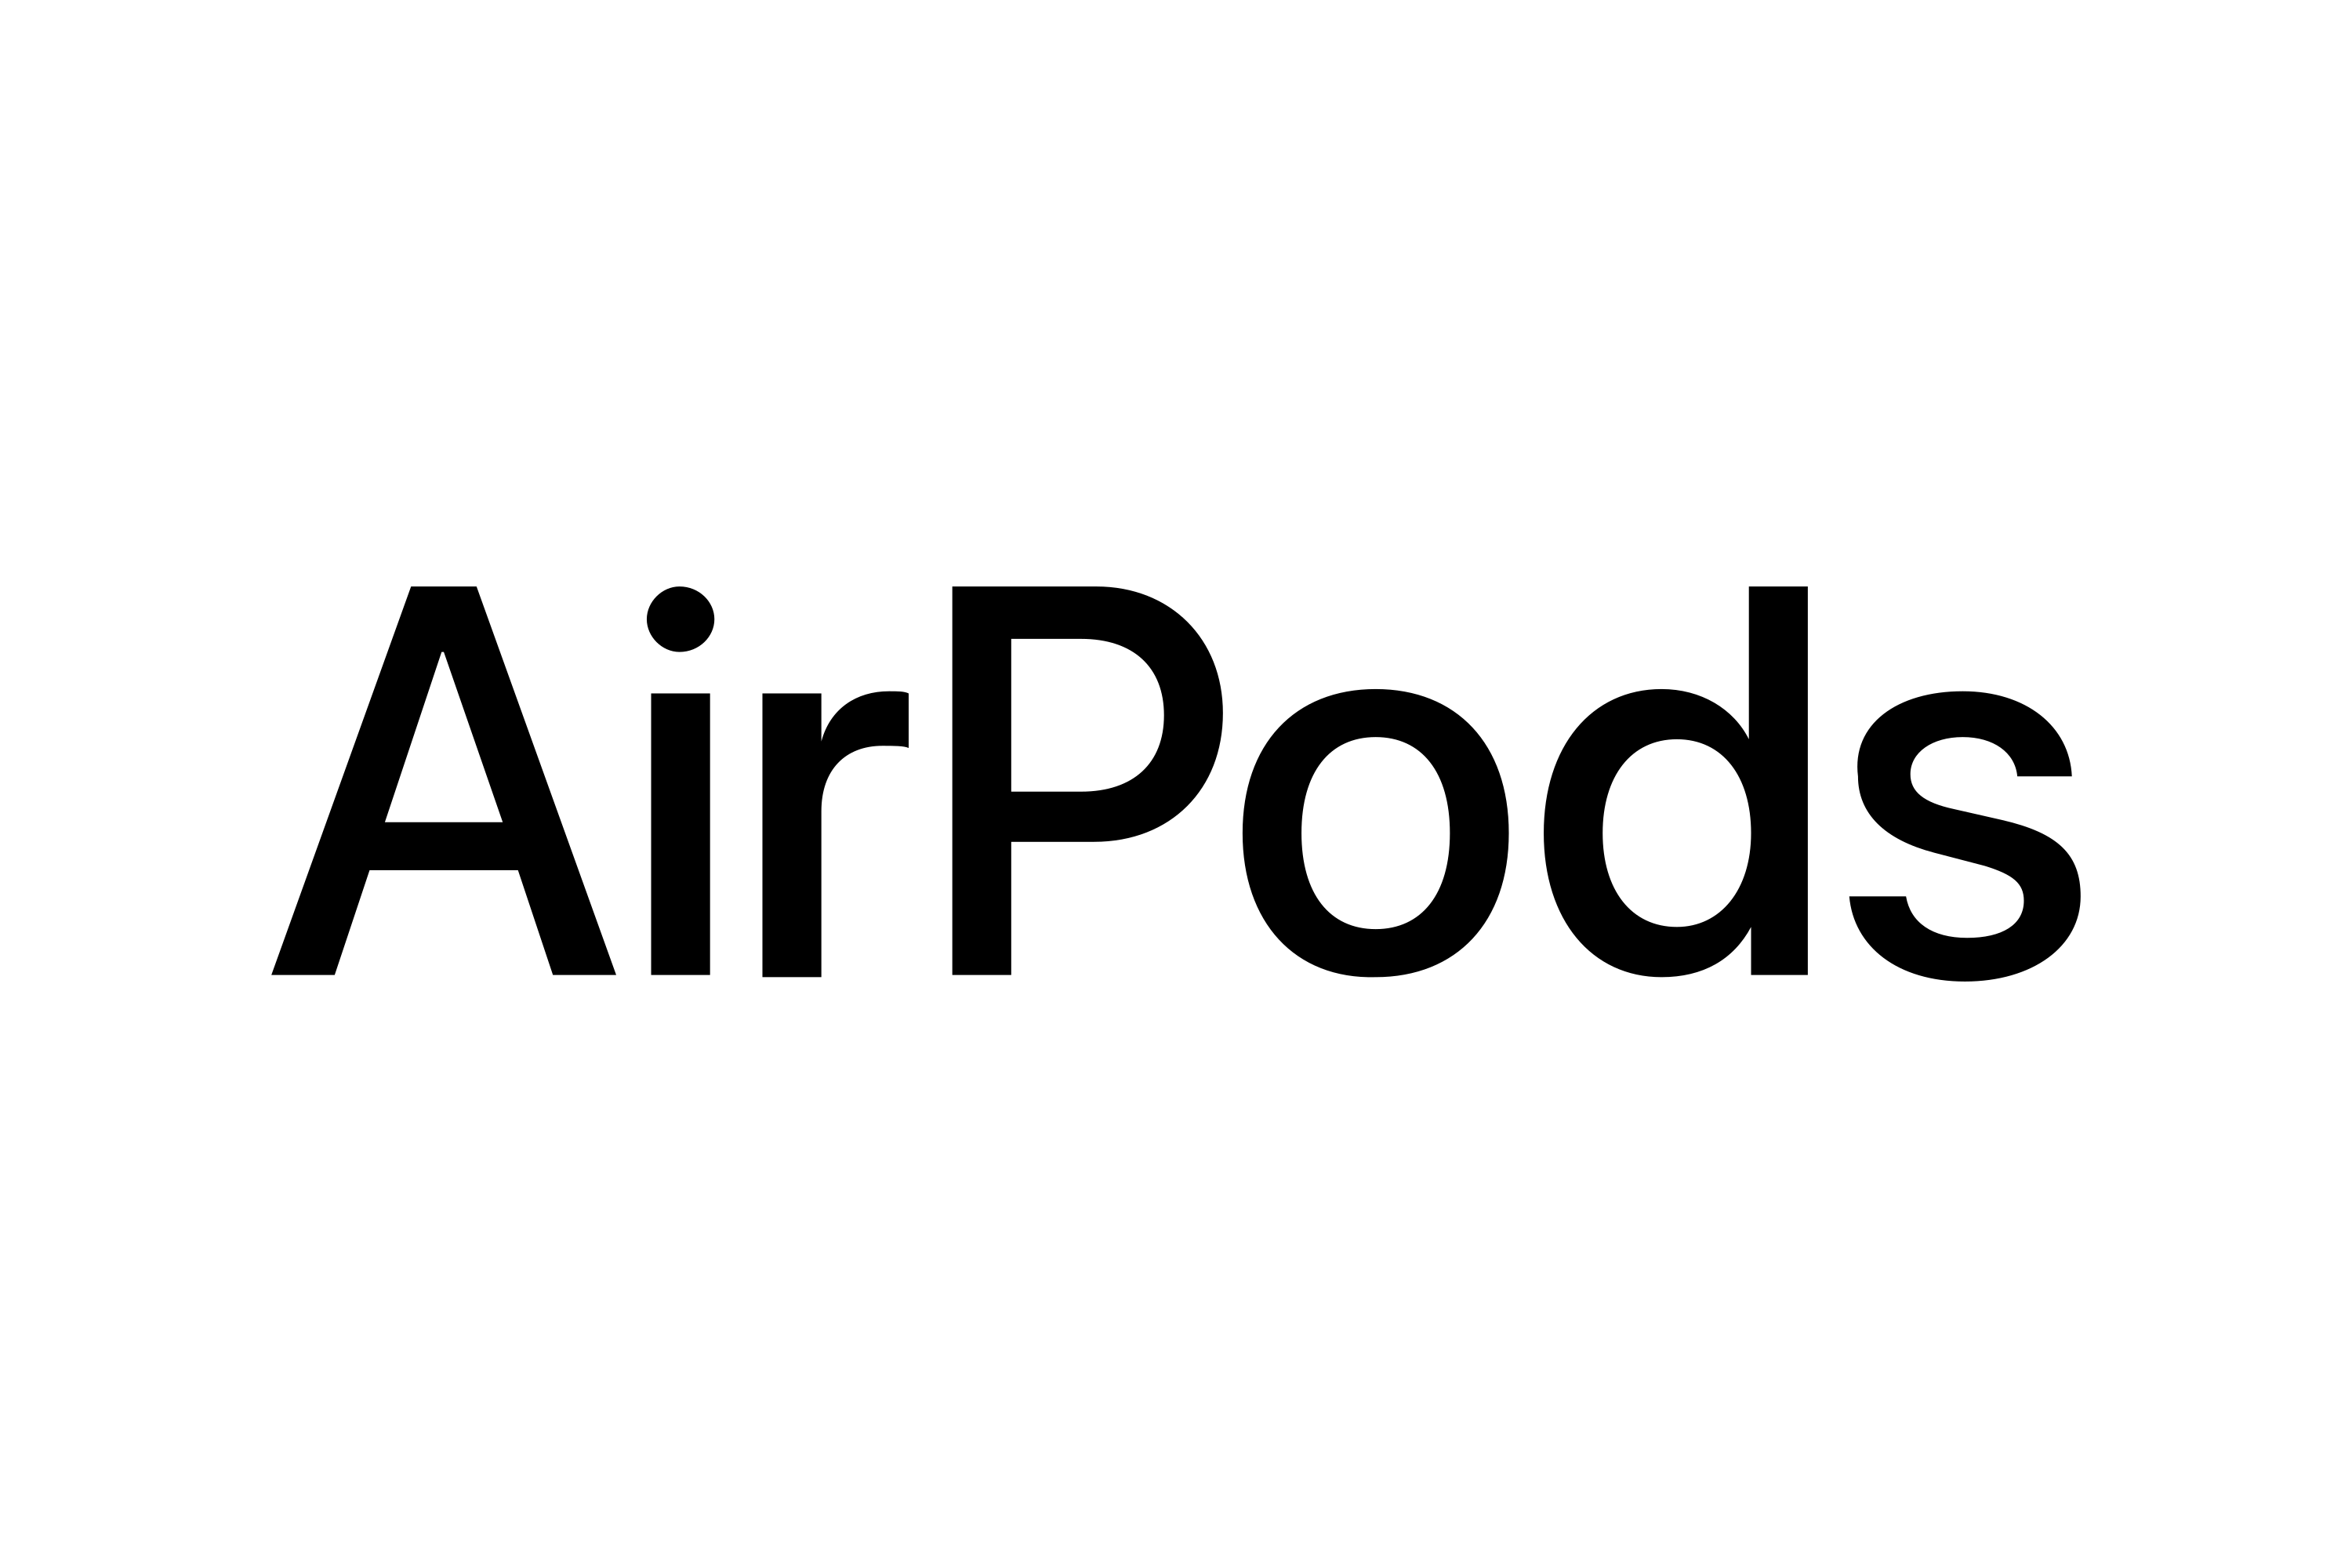 Download AirPods Logo in SVG Vector or PNG File Format - Logo.wine